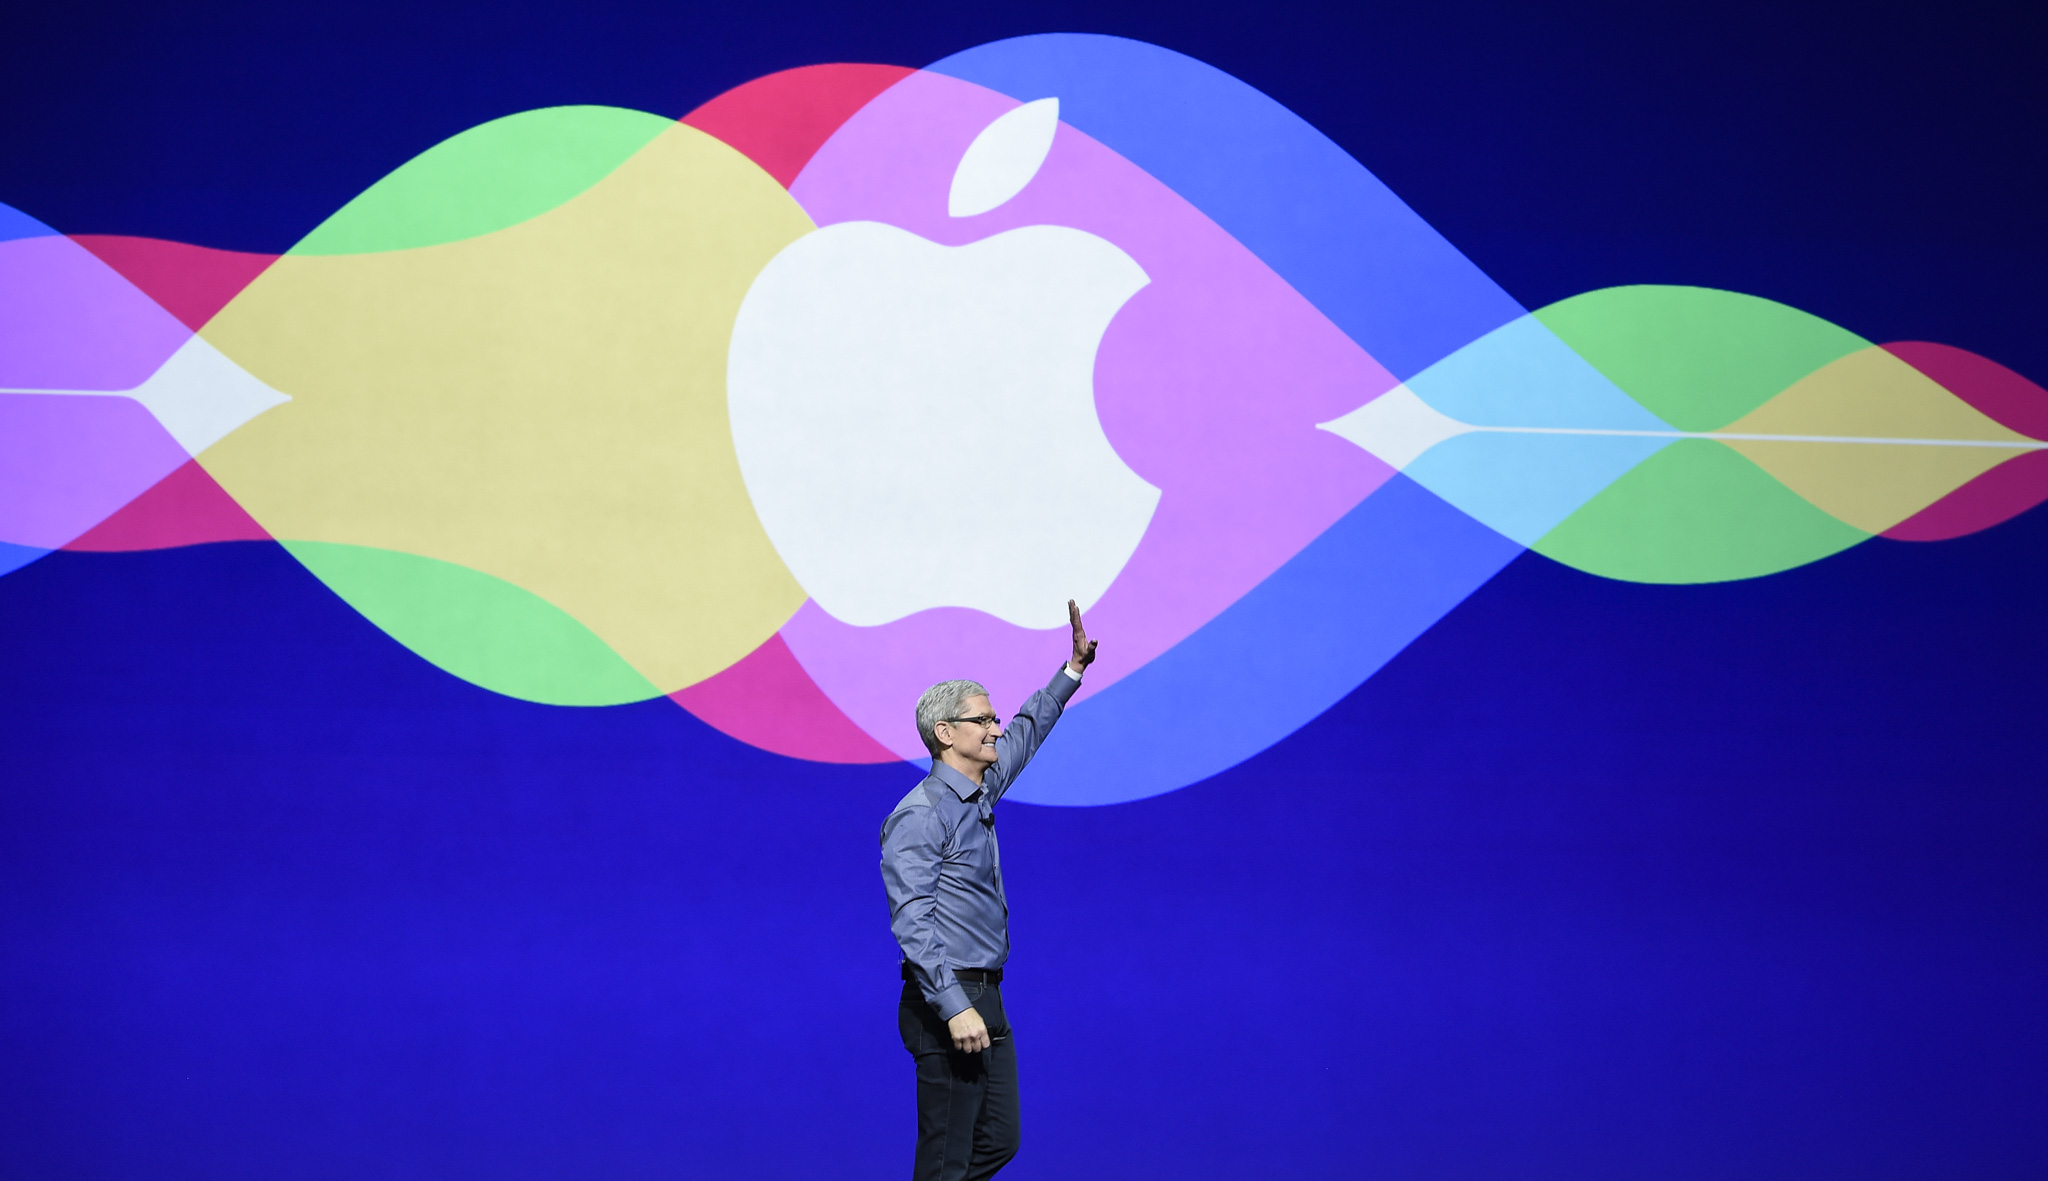 Apple's Tim Cook at an event to launch the iPhone 6S and iPad Pro. Photo: Xinhua